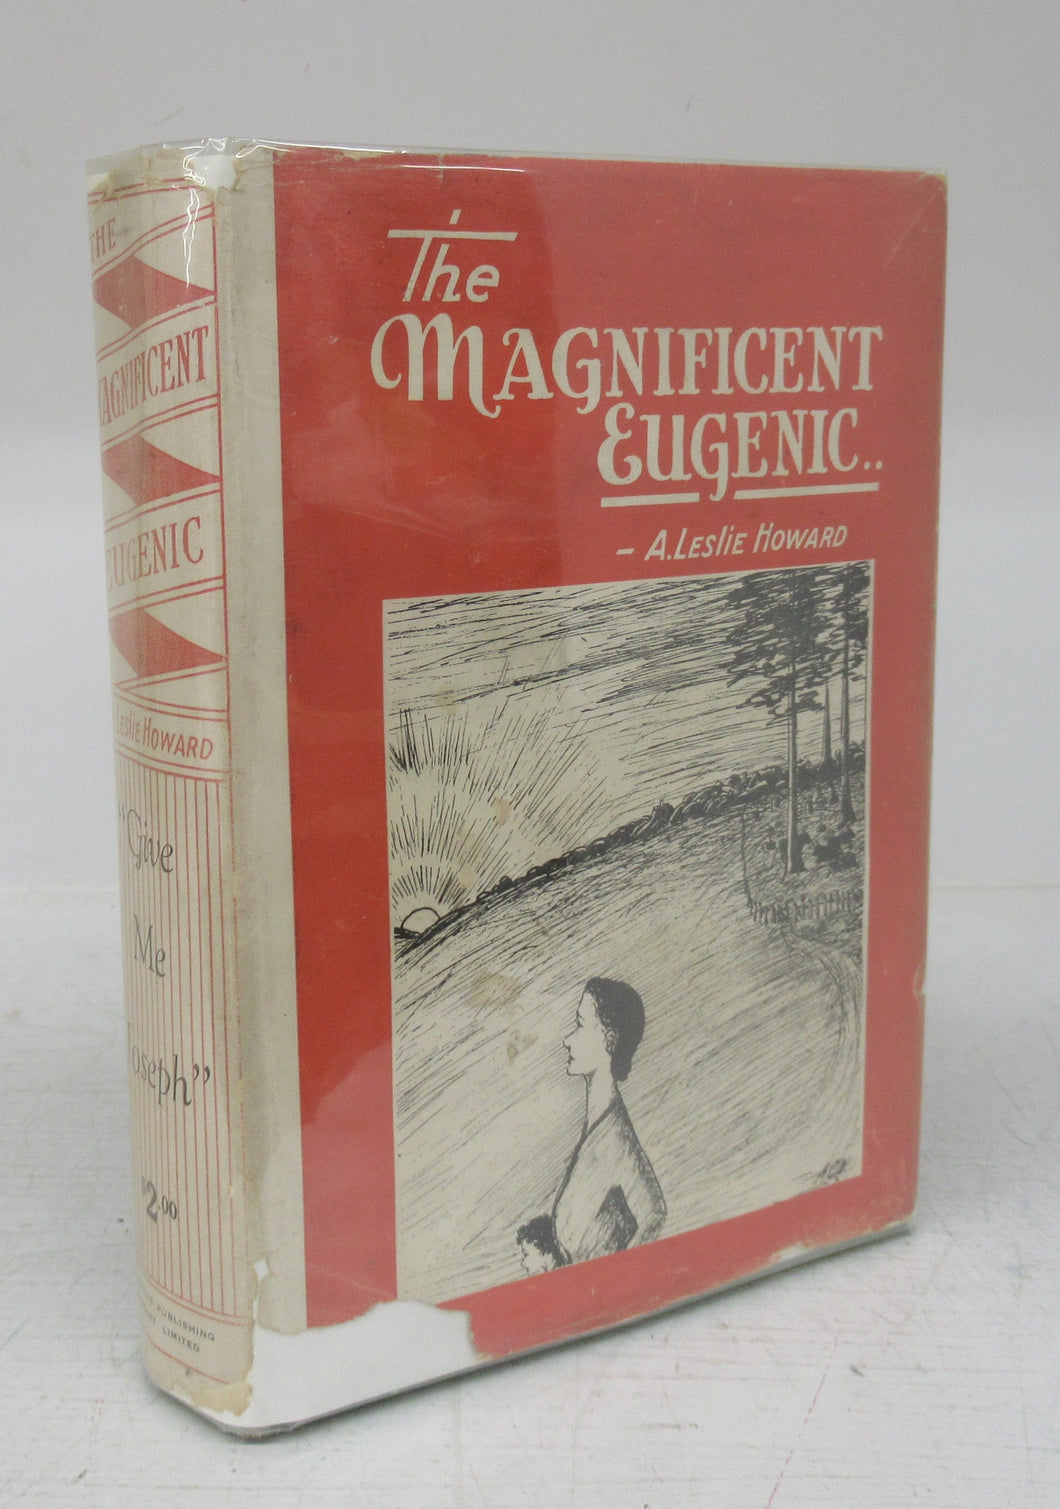 The Magnificent Eugenic